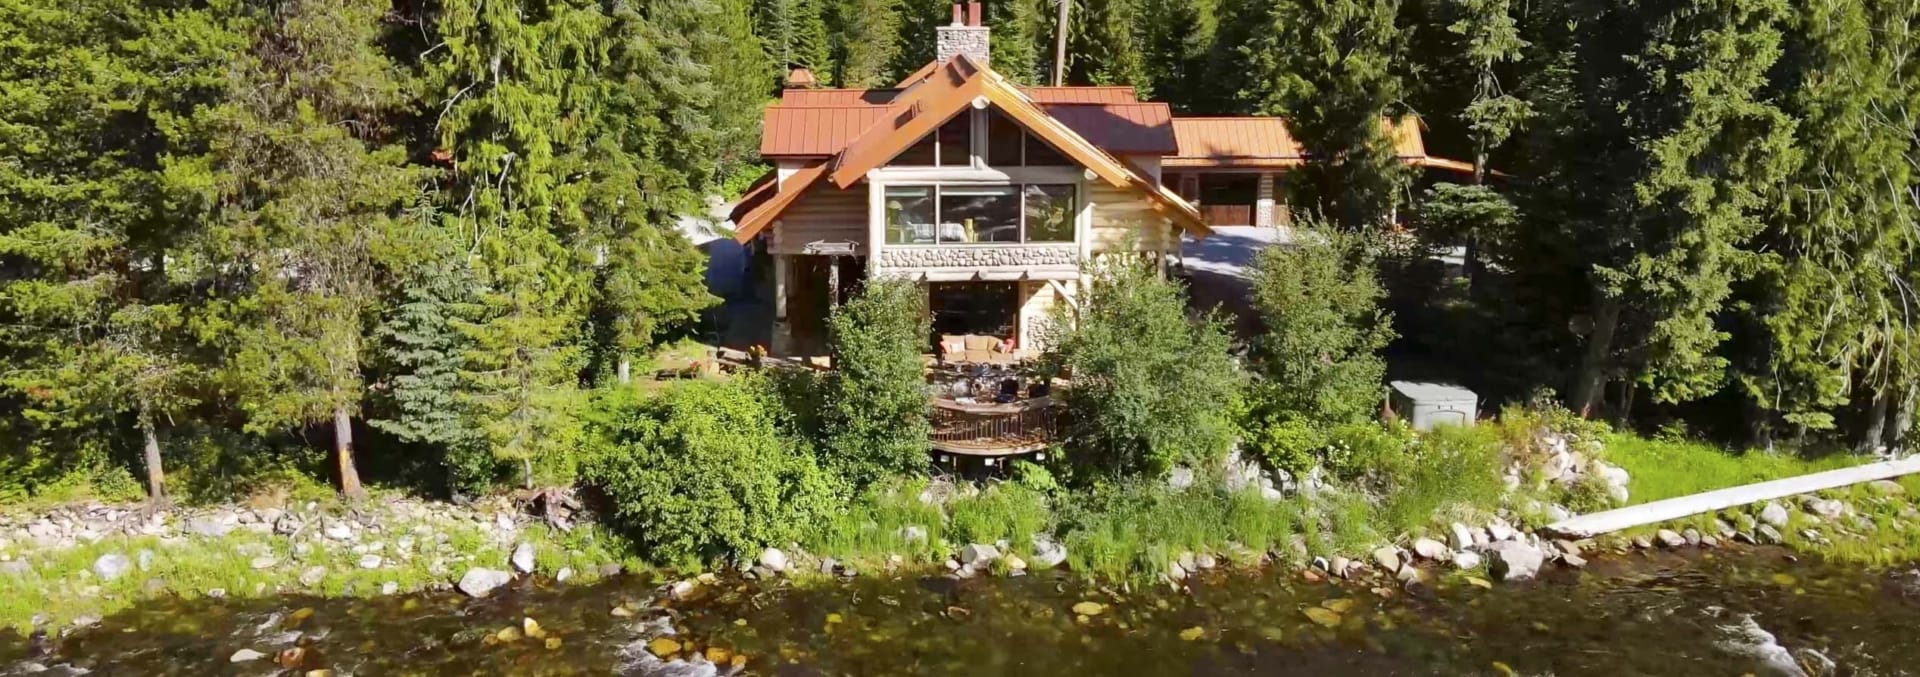 idaho waterfront property for sale lochsa river's edge